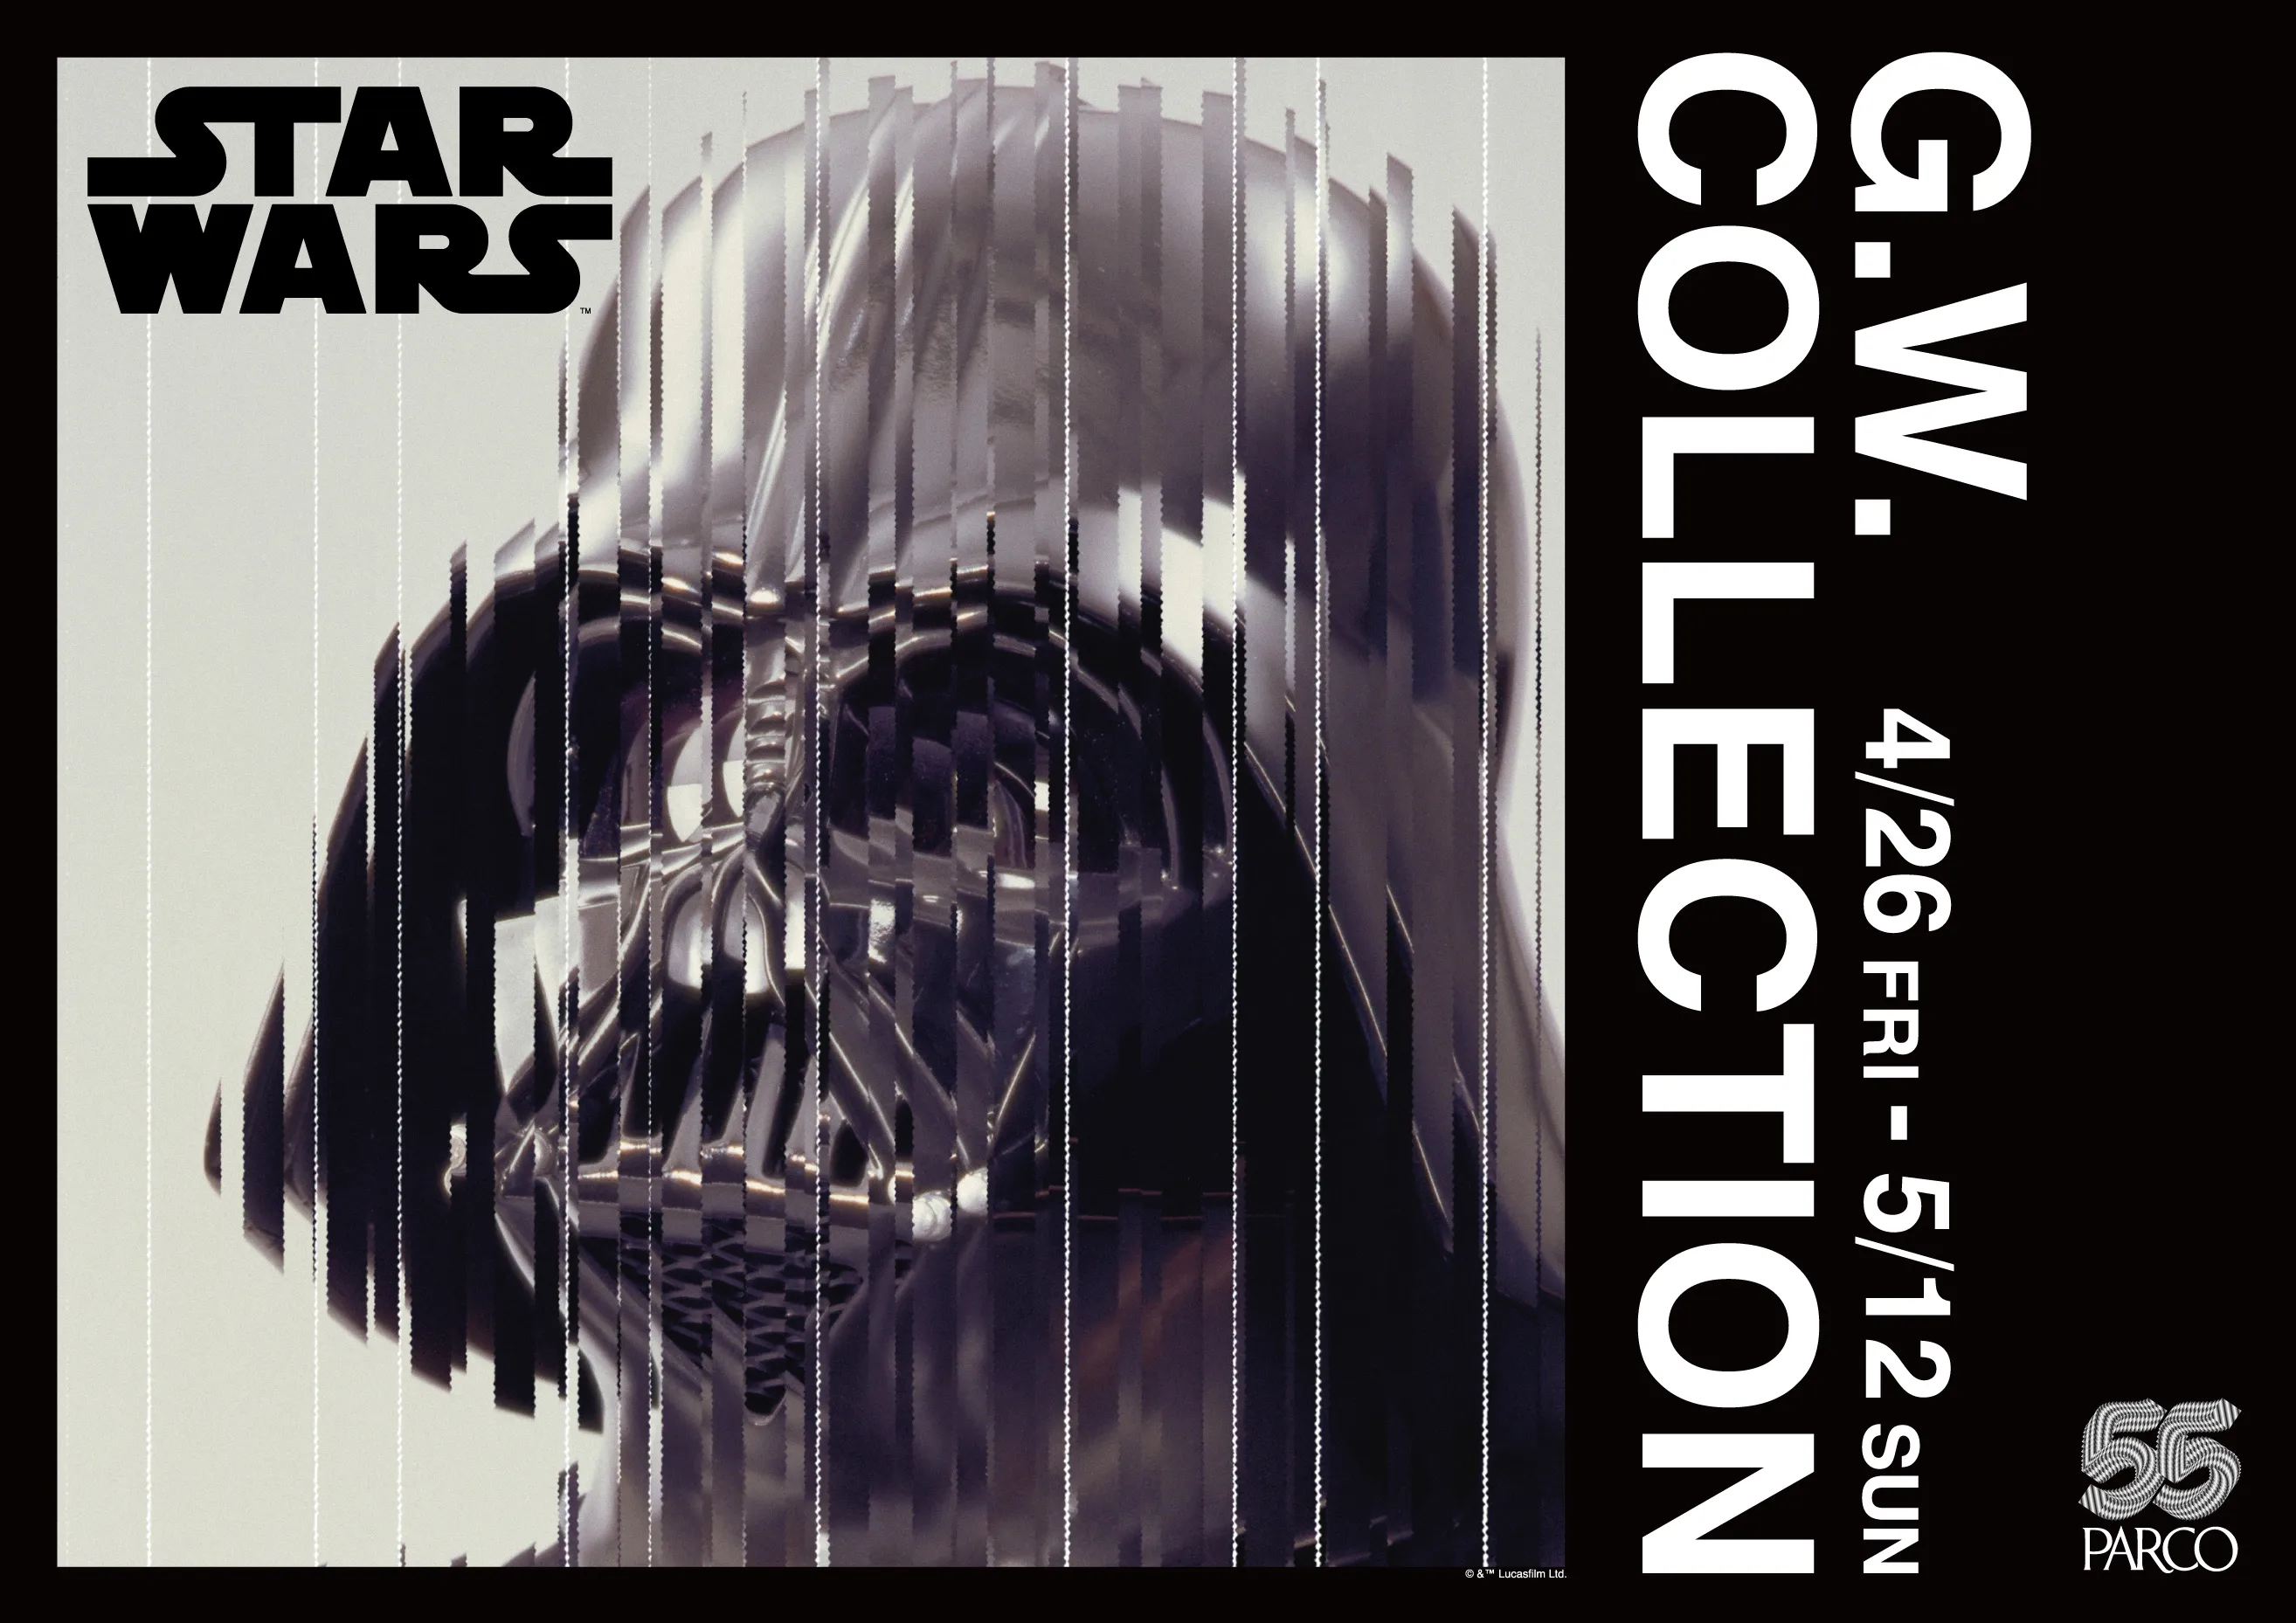 STAR WARS G.W. COLLECTION PARCO 55th CAMPAIGN